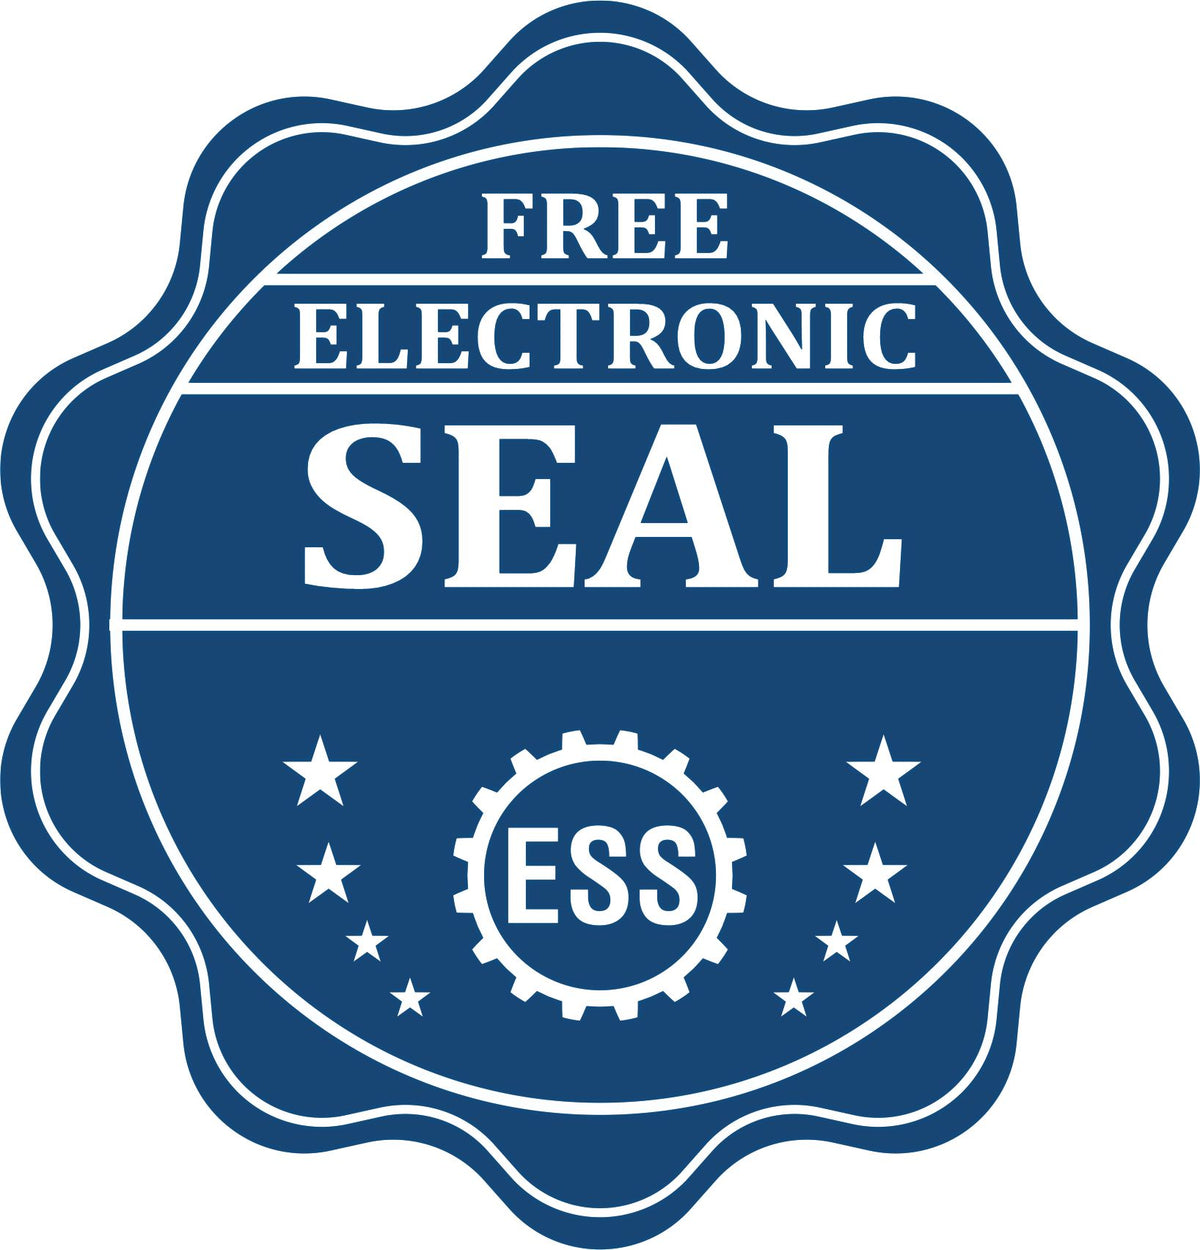 A badge showing a free electronic seal for the Hybrid Montana Landscape Architect Seal with stars and the ESS gear on the emblem.